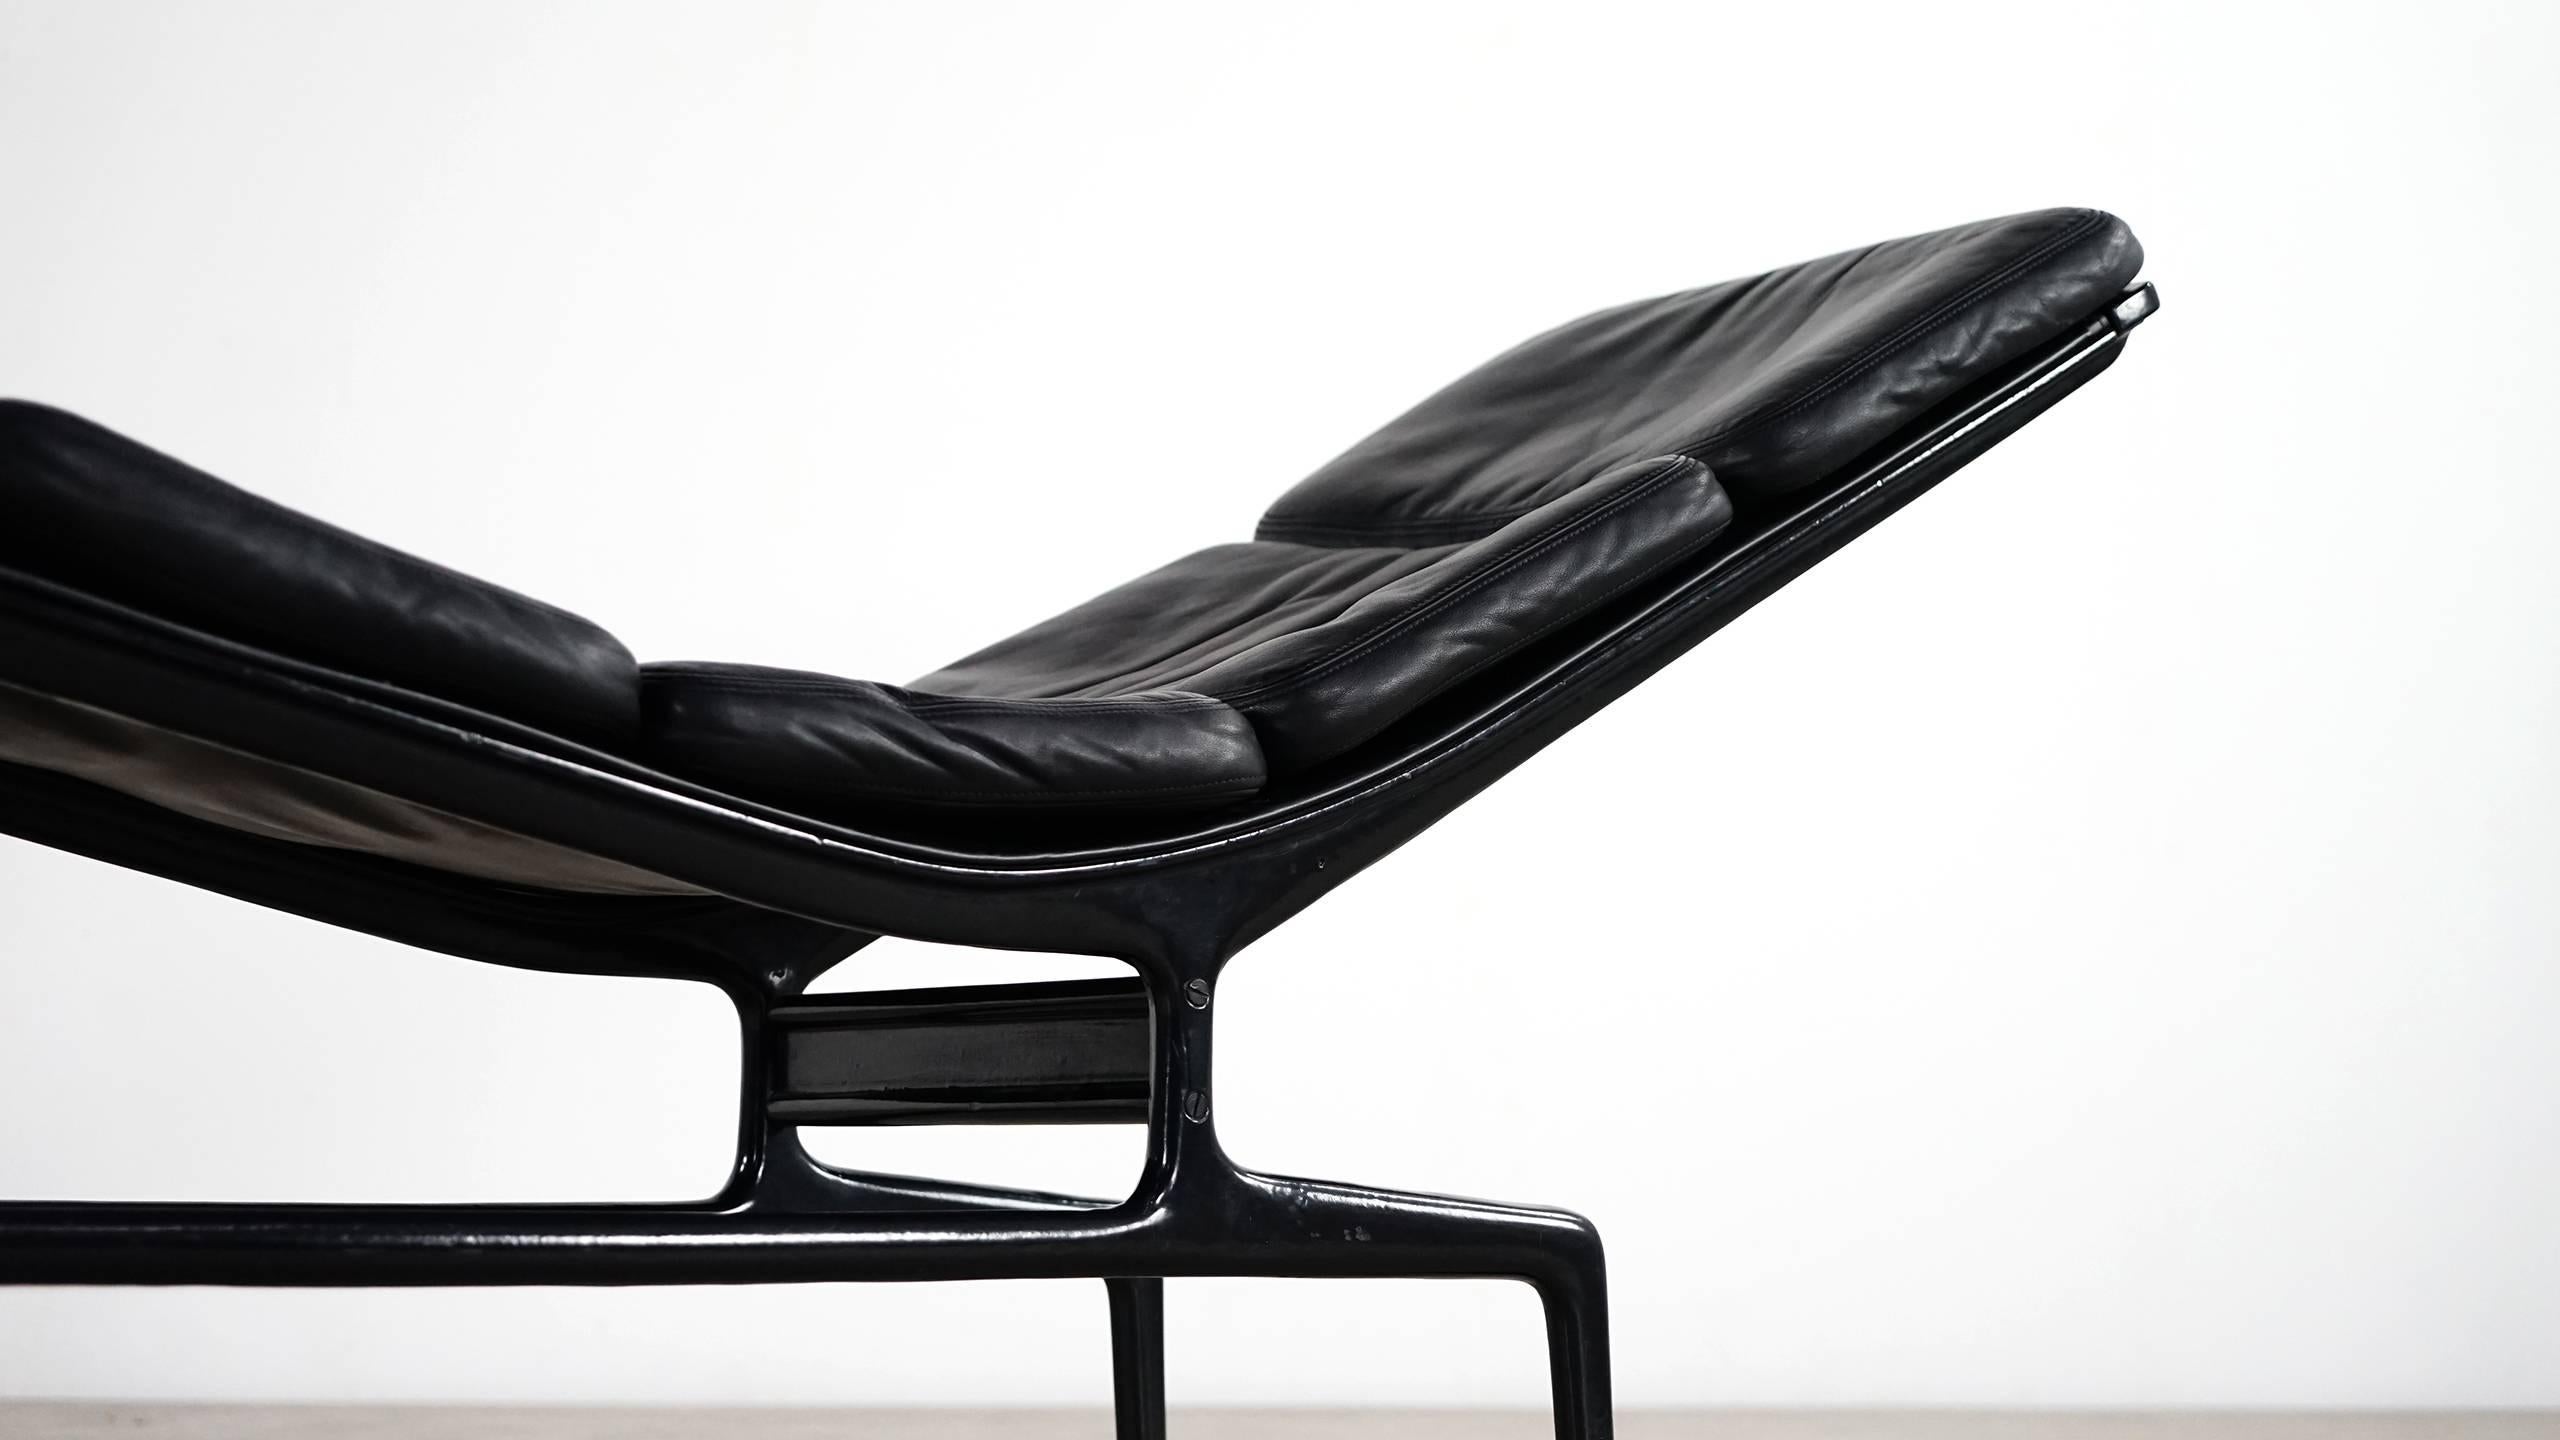 Minimalist and modernist Charles Eames chaise in black for Herman Miller, designed in 1968 for filmmaker Billy Wilder. 

This is an early production Eames chaise with black leather cushions on a black die-cast aluminium frame. The chaise features